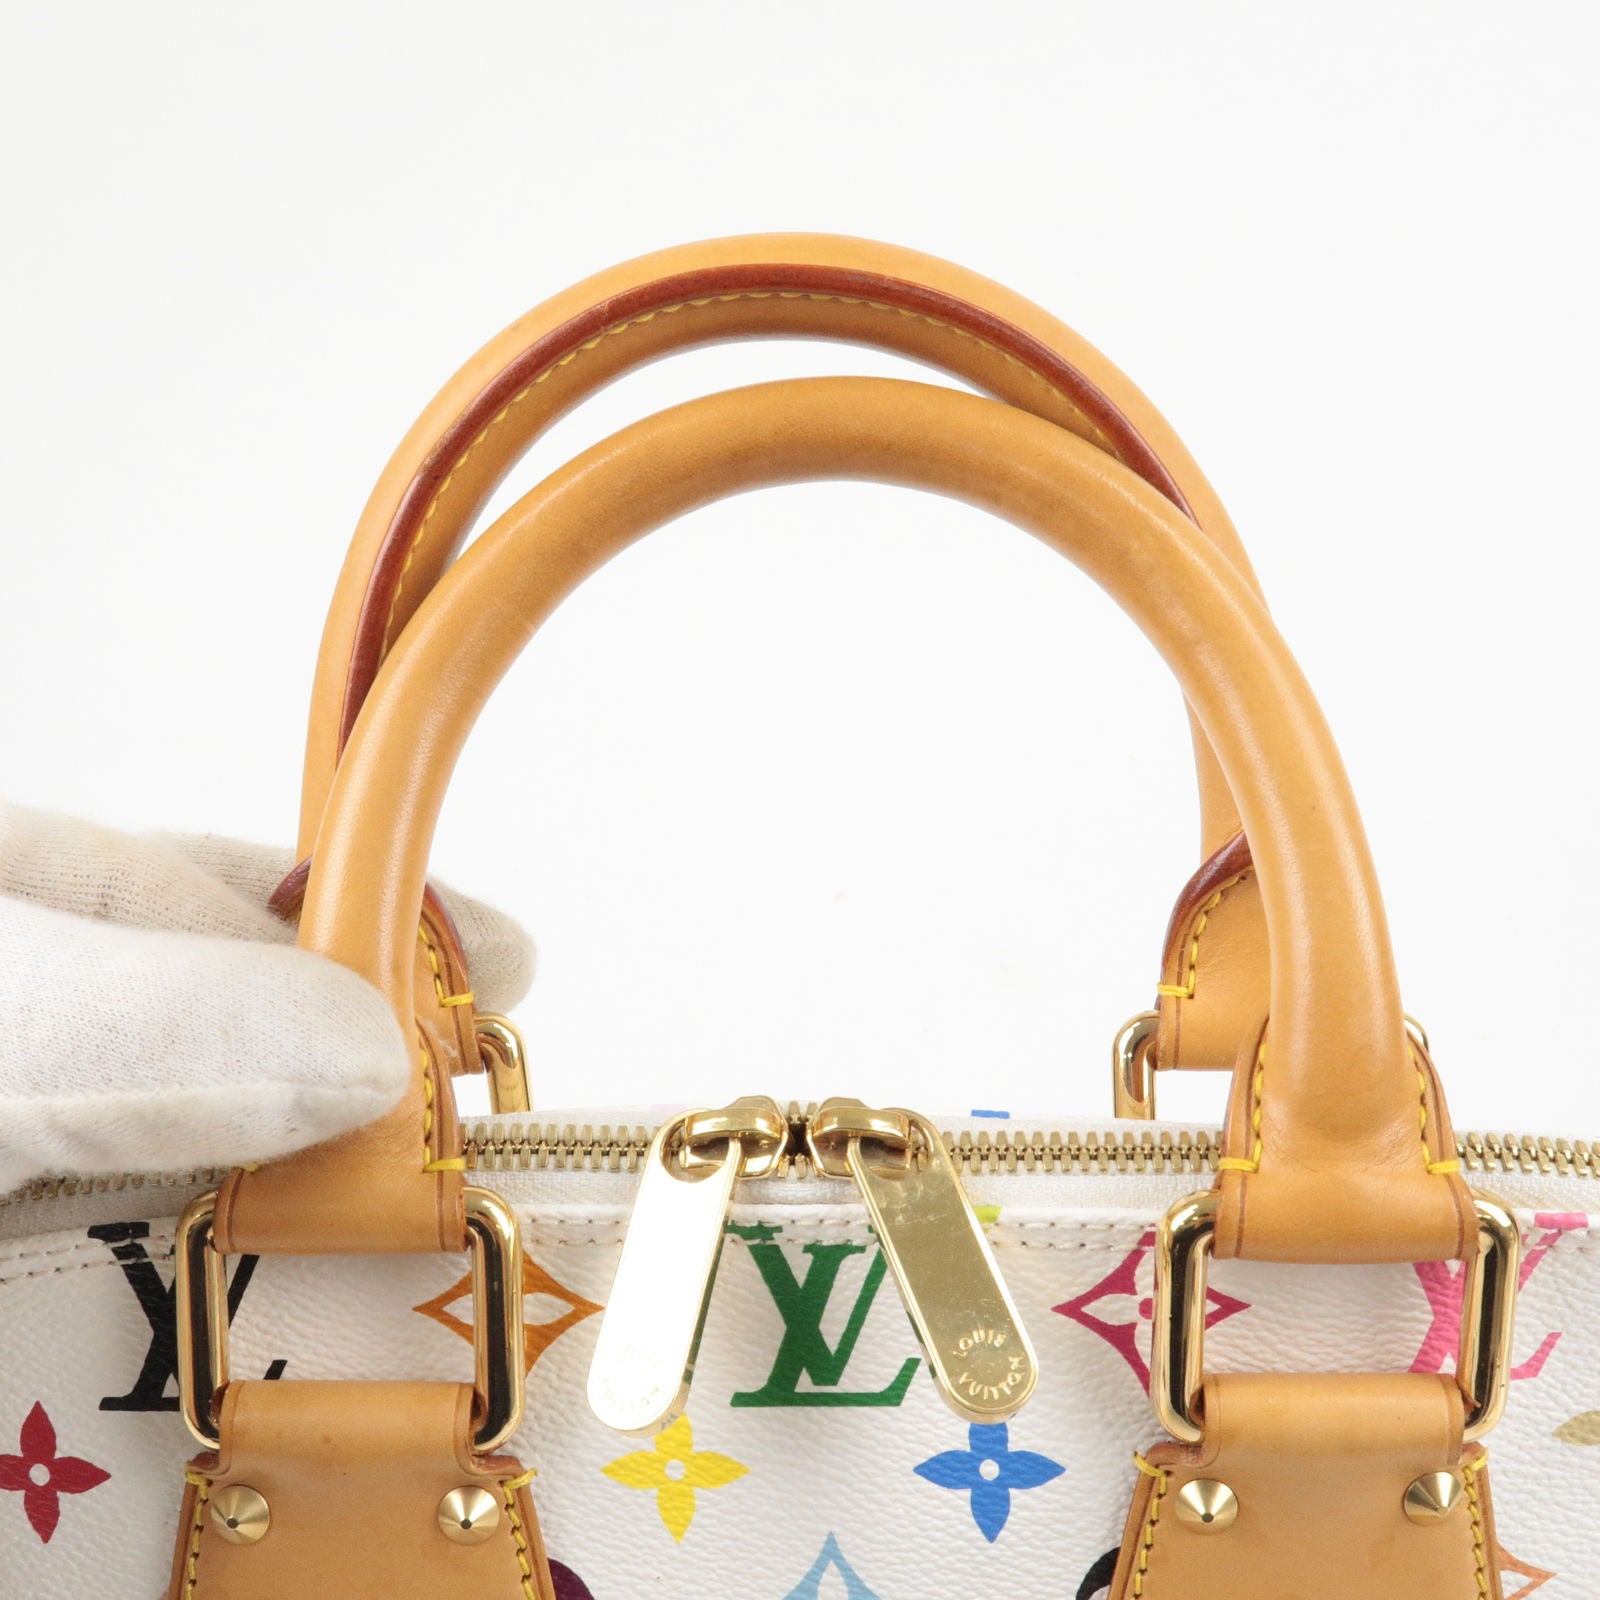 Louis Vuitton Multicolor Trunks & Bags Key and Bag Charm - Yoogi's